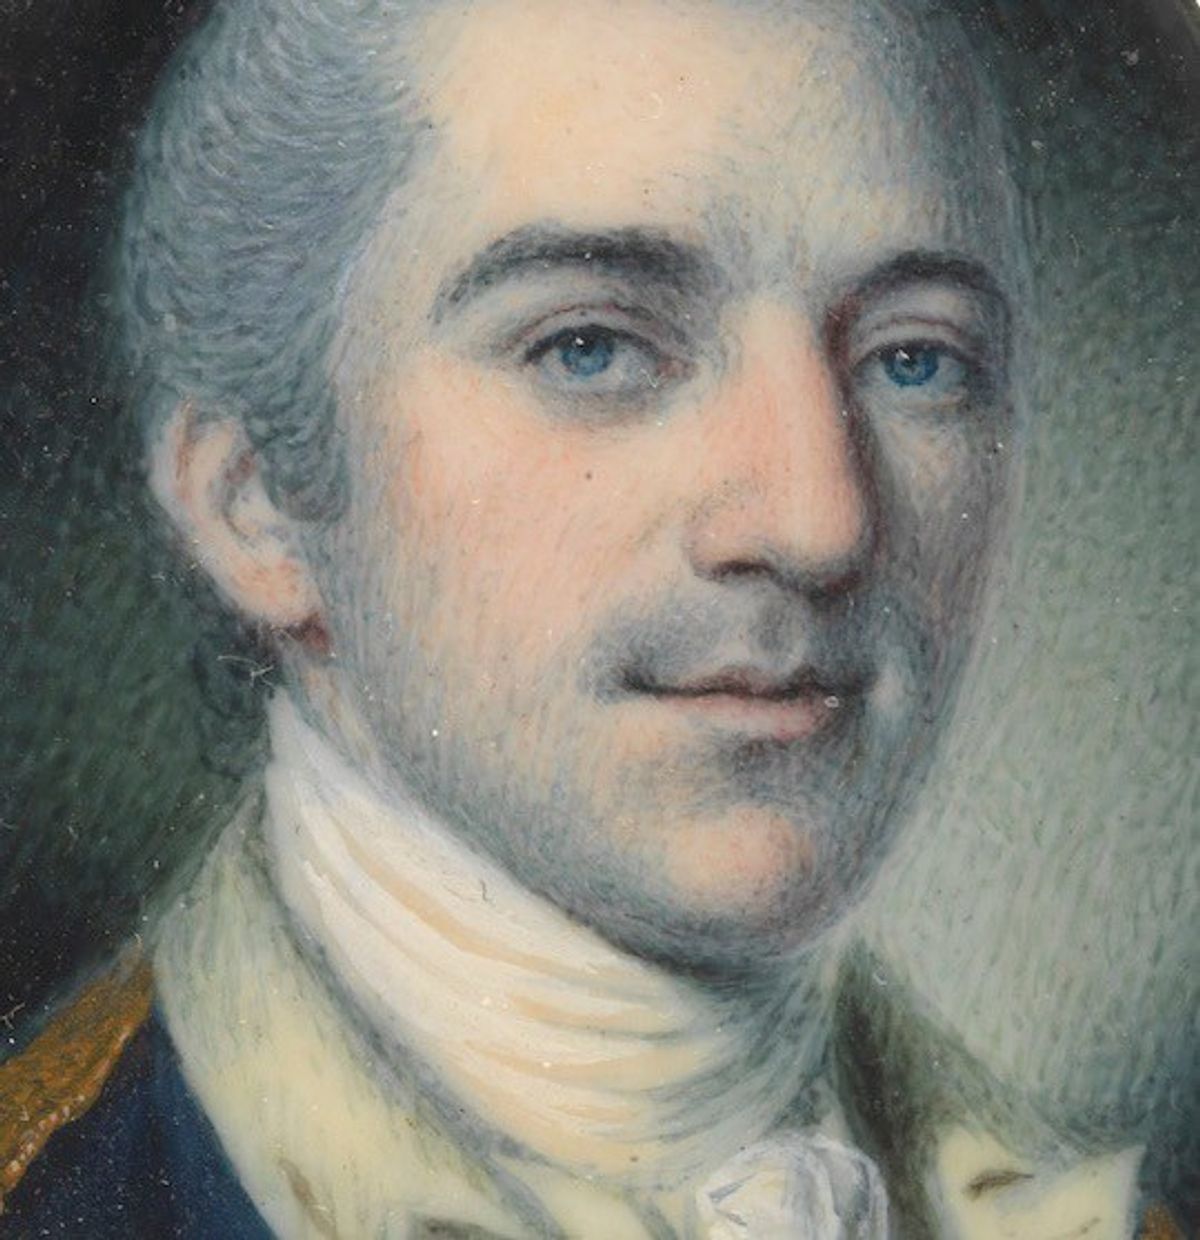 Under-Appreciated Historical Figure of the Day: John Laurens